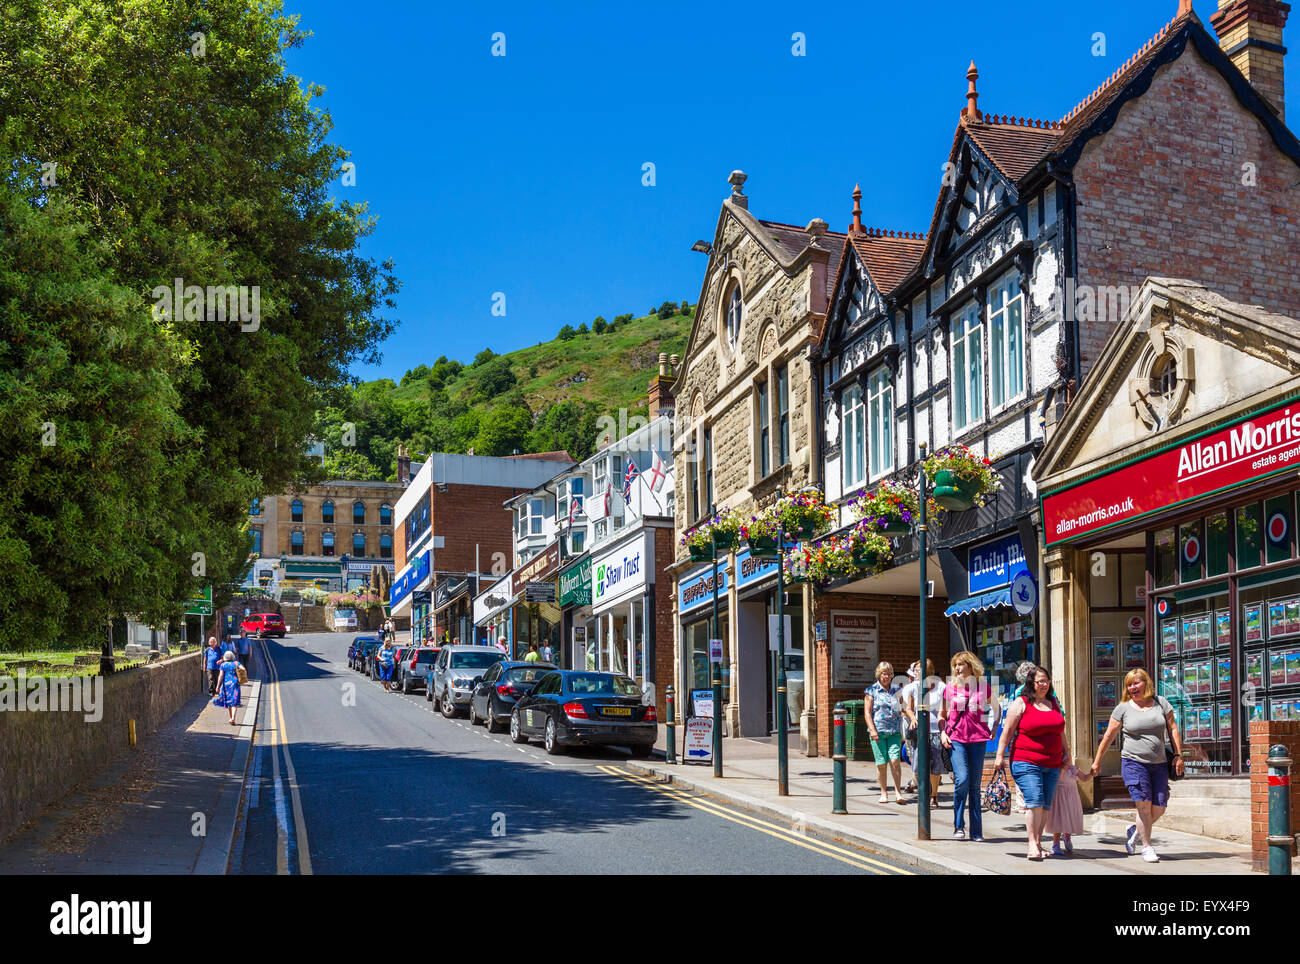 Shops on Church Street in the town centre, Great Malvern, Malvern Hills, Worcestershire, England, UK Stock Photo